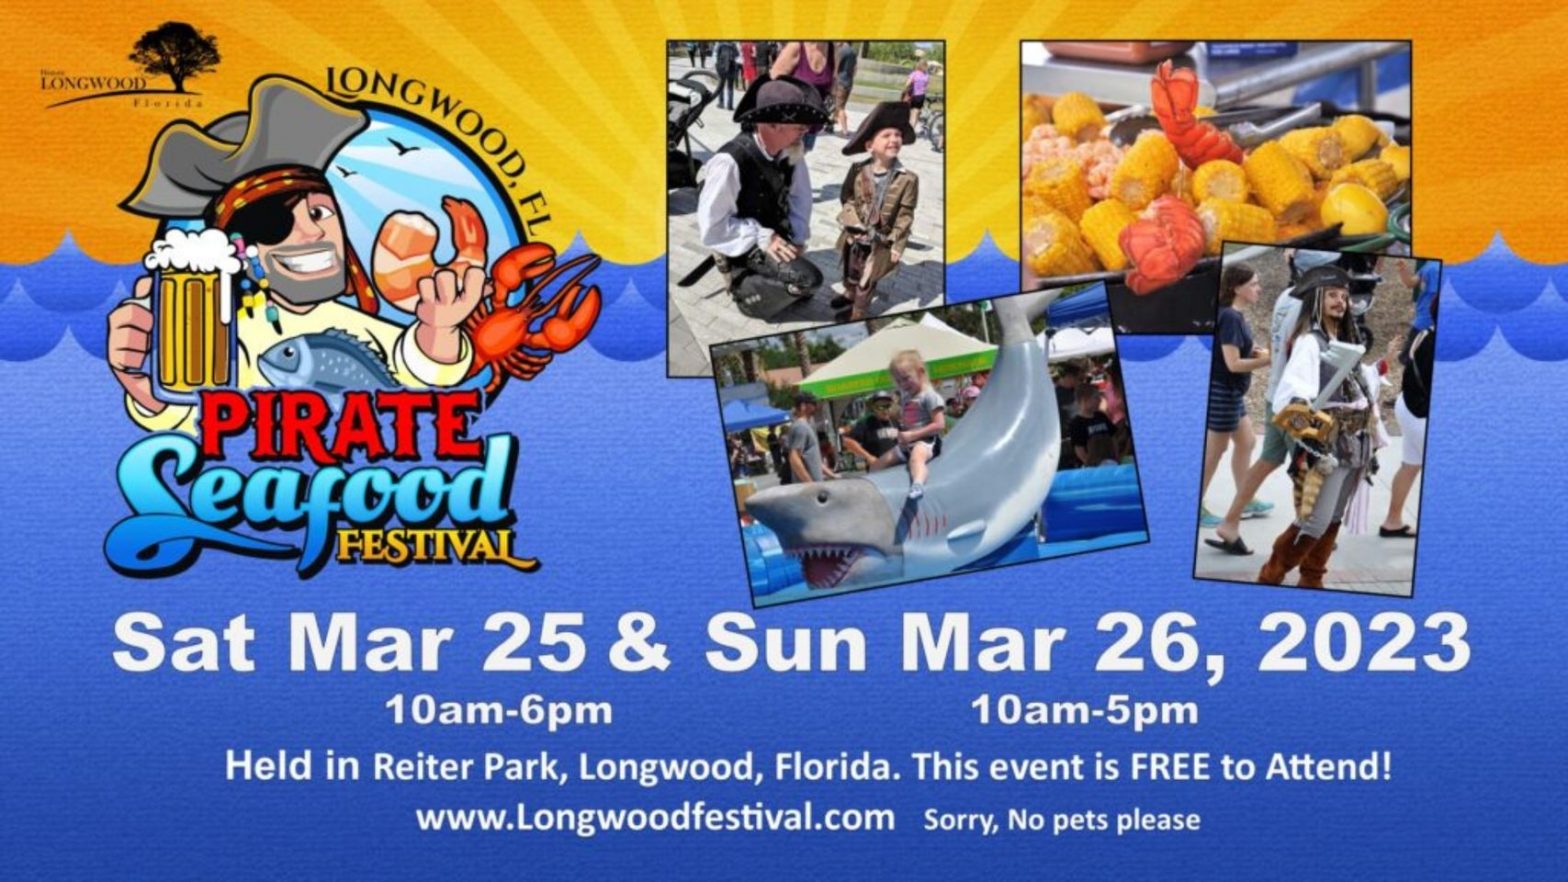 Pirate Seafood Festival in Longwood | 2023 | Park Ave Magazine